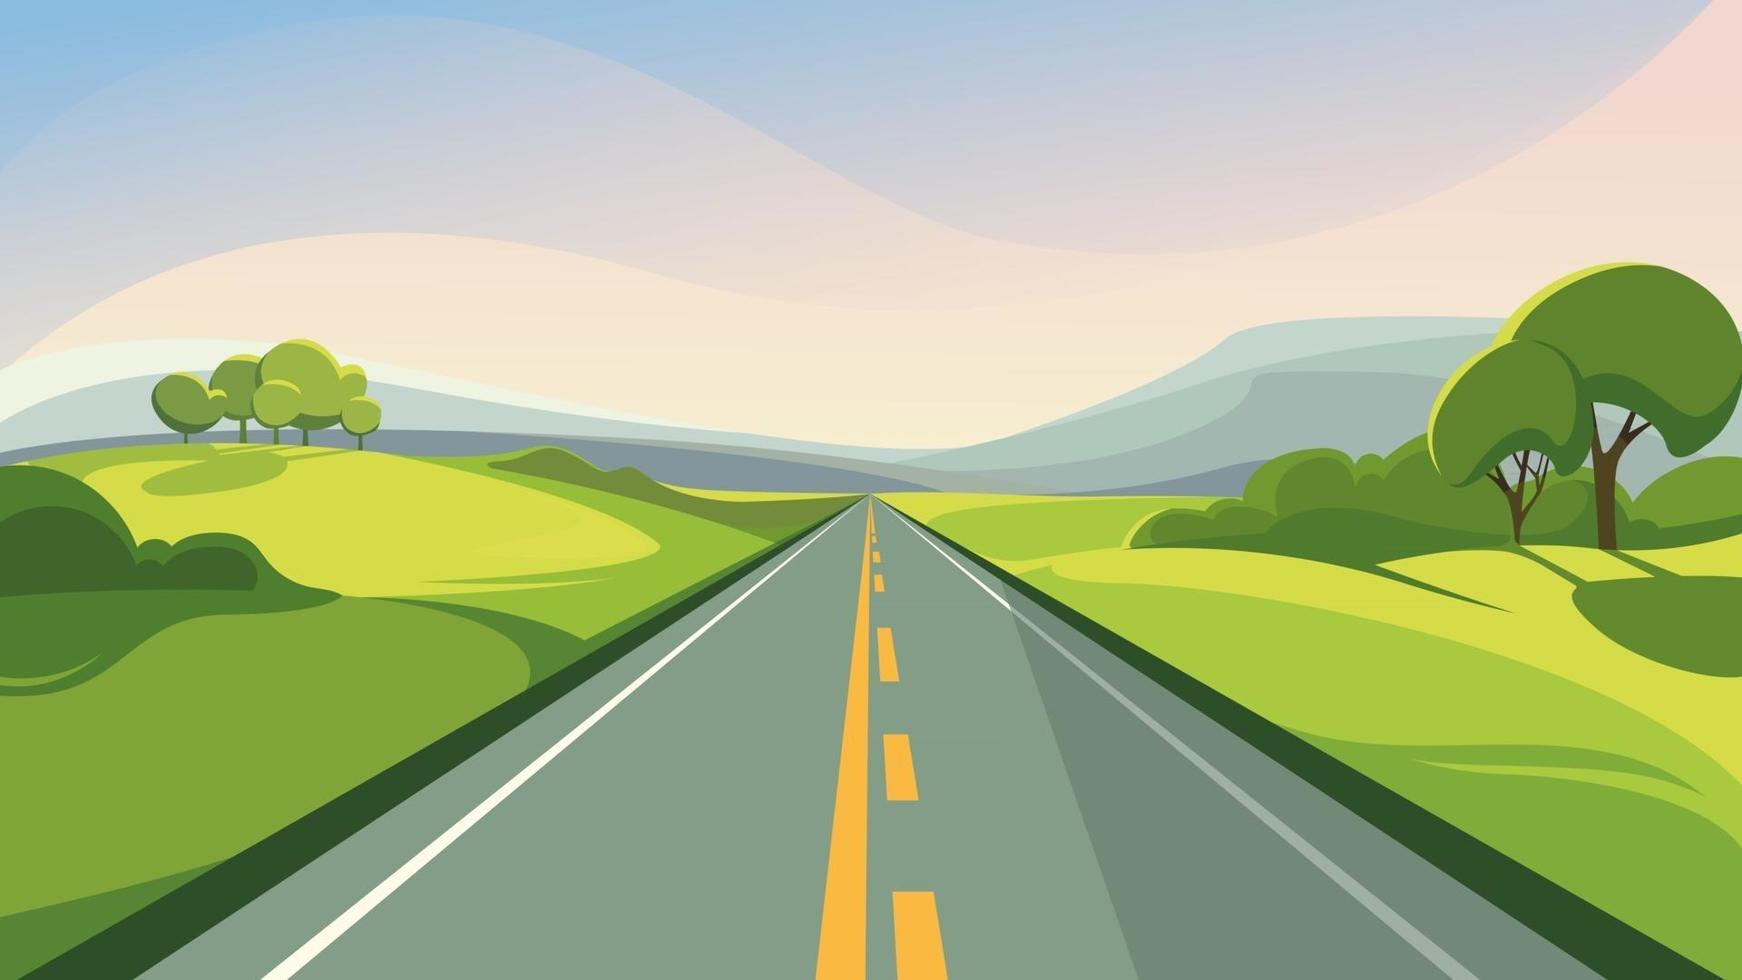 Summer road stretching into the horizon vector